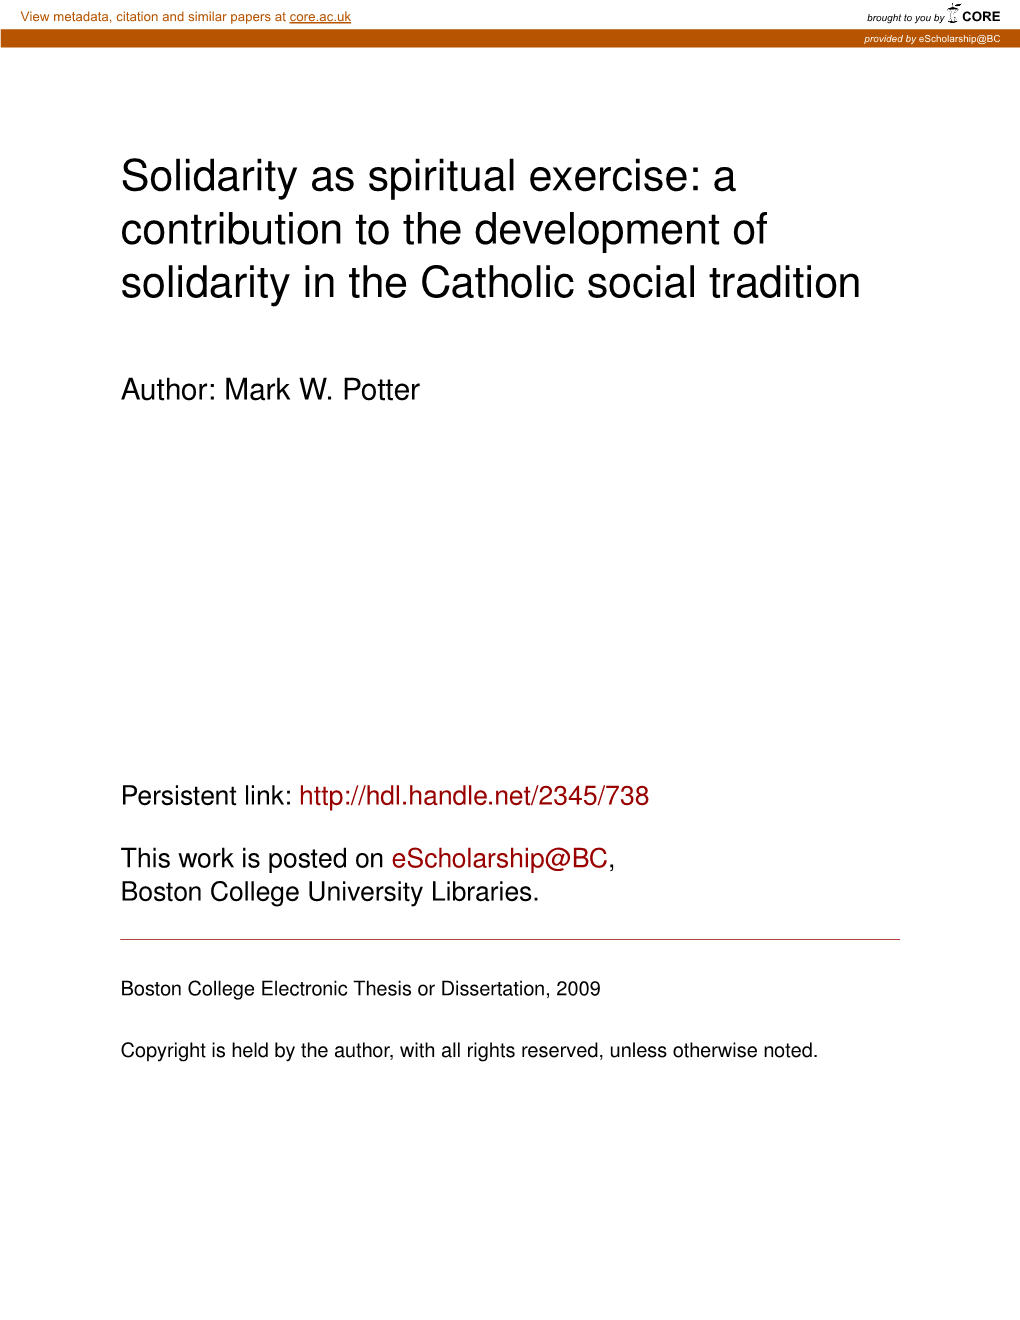 Solidarity As Spiritual Exercise: a Contribution to the Development of Solidarity in the Catholic Social Tradition